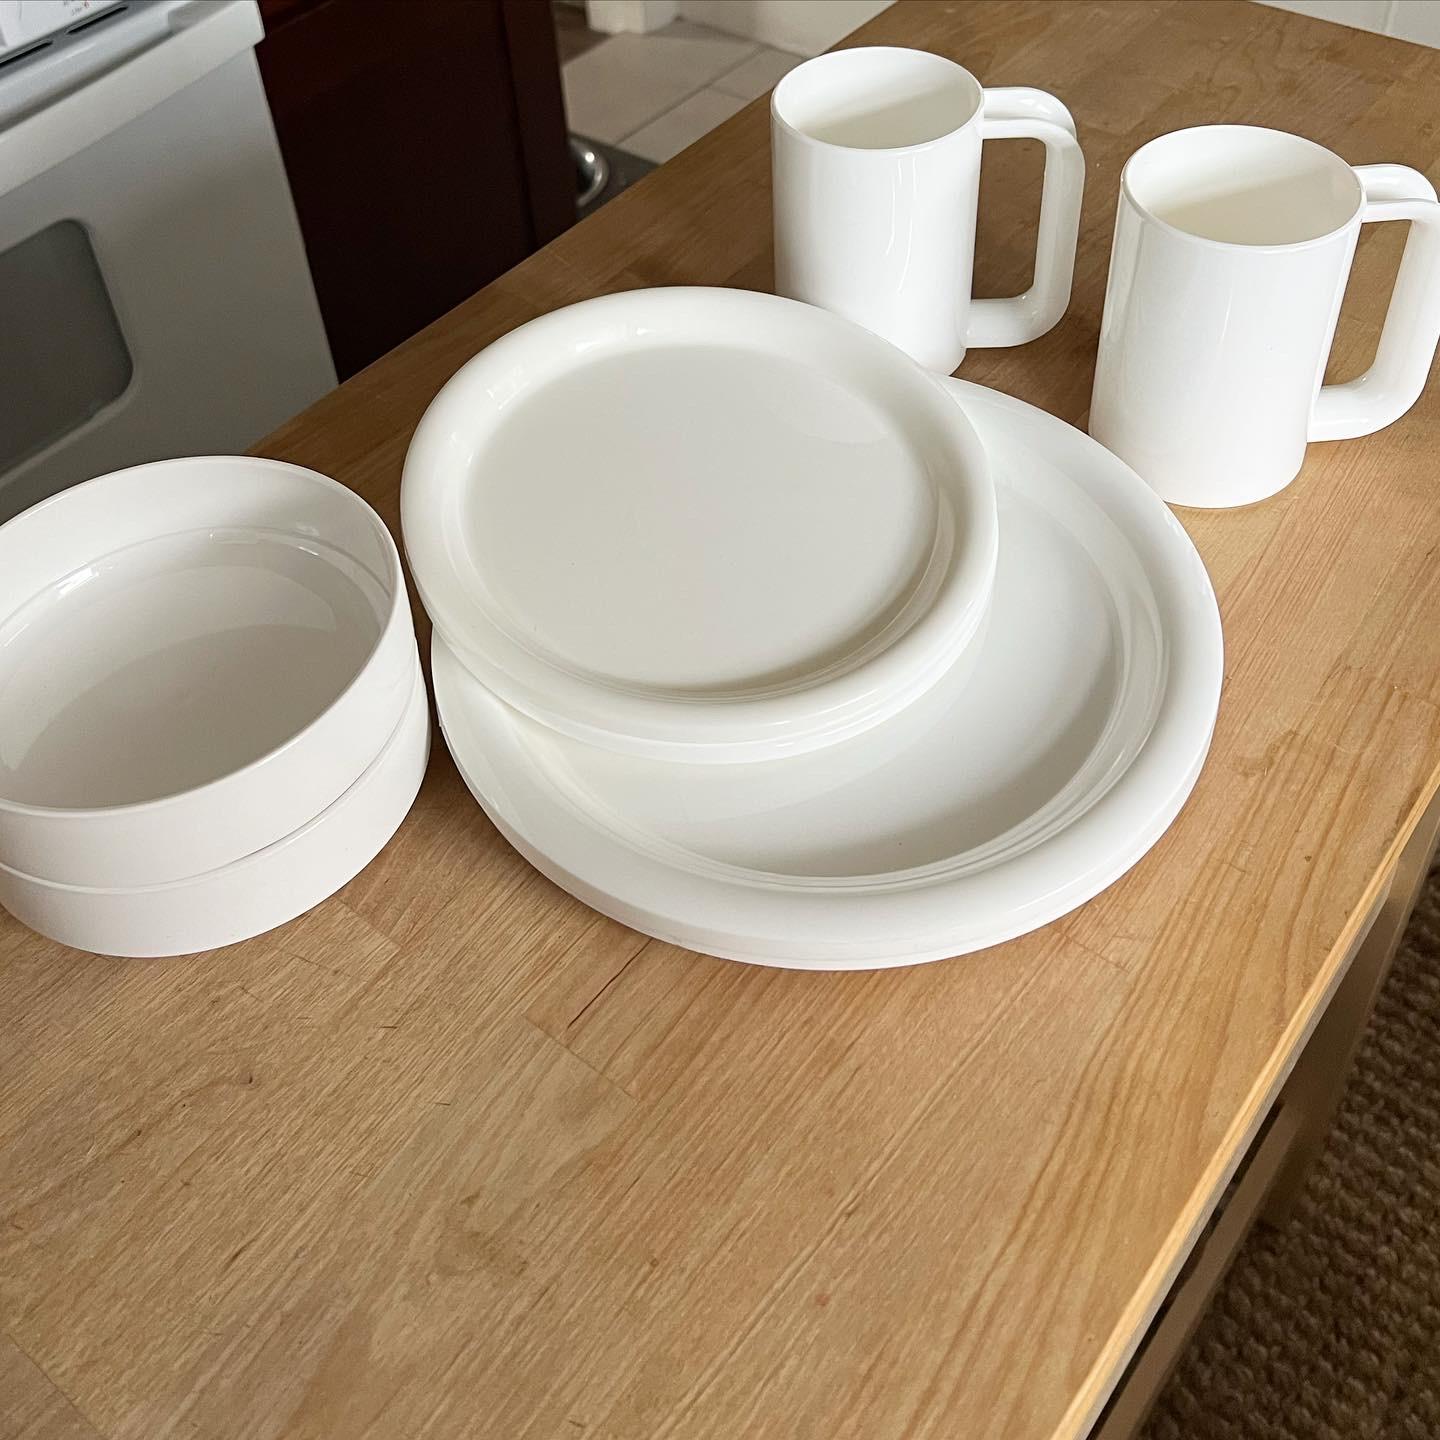 This listing includes two sets! two dinner plates, two salad/dessert plates, two bowls, and two mug! Deadstock! Came in original packaging which was quite dusty on the outside, but preserved these perfect, brand new sets inside.  Stackable.